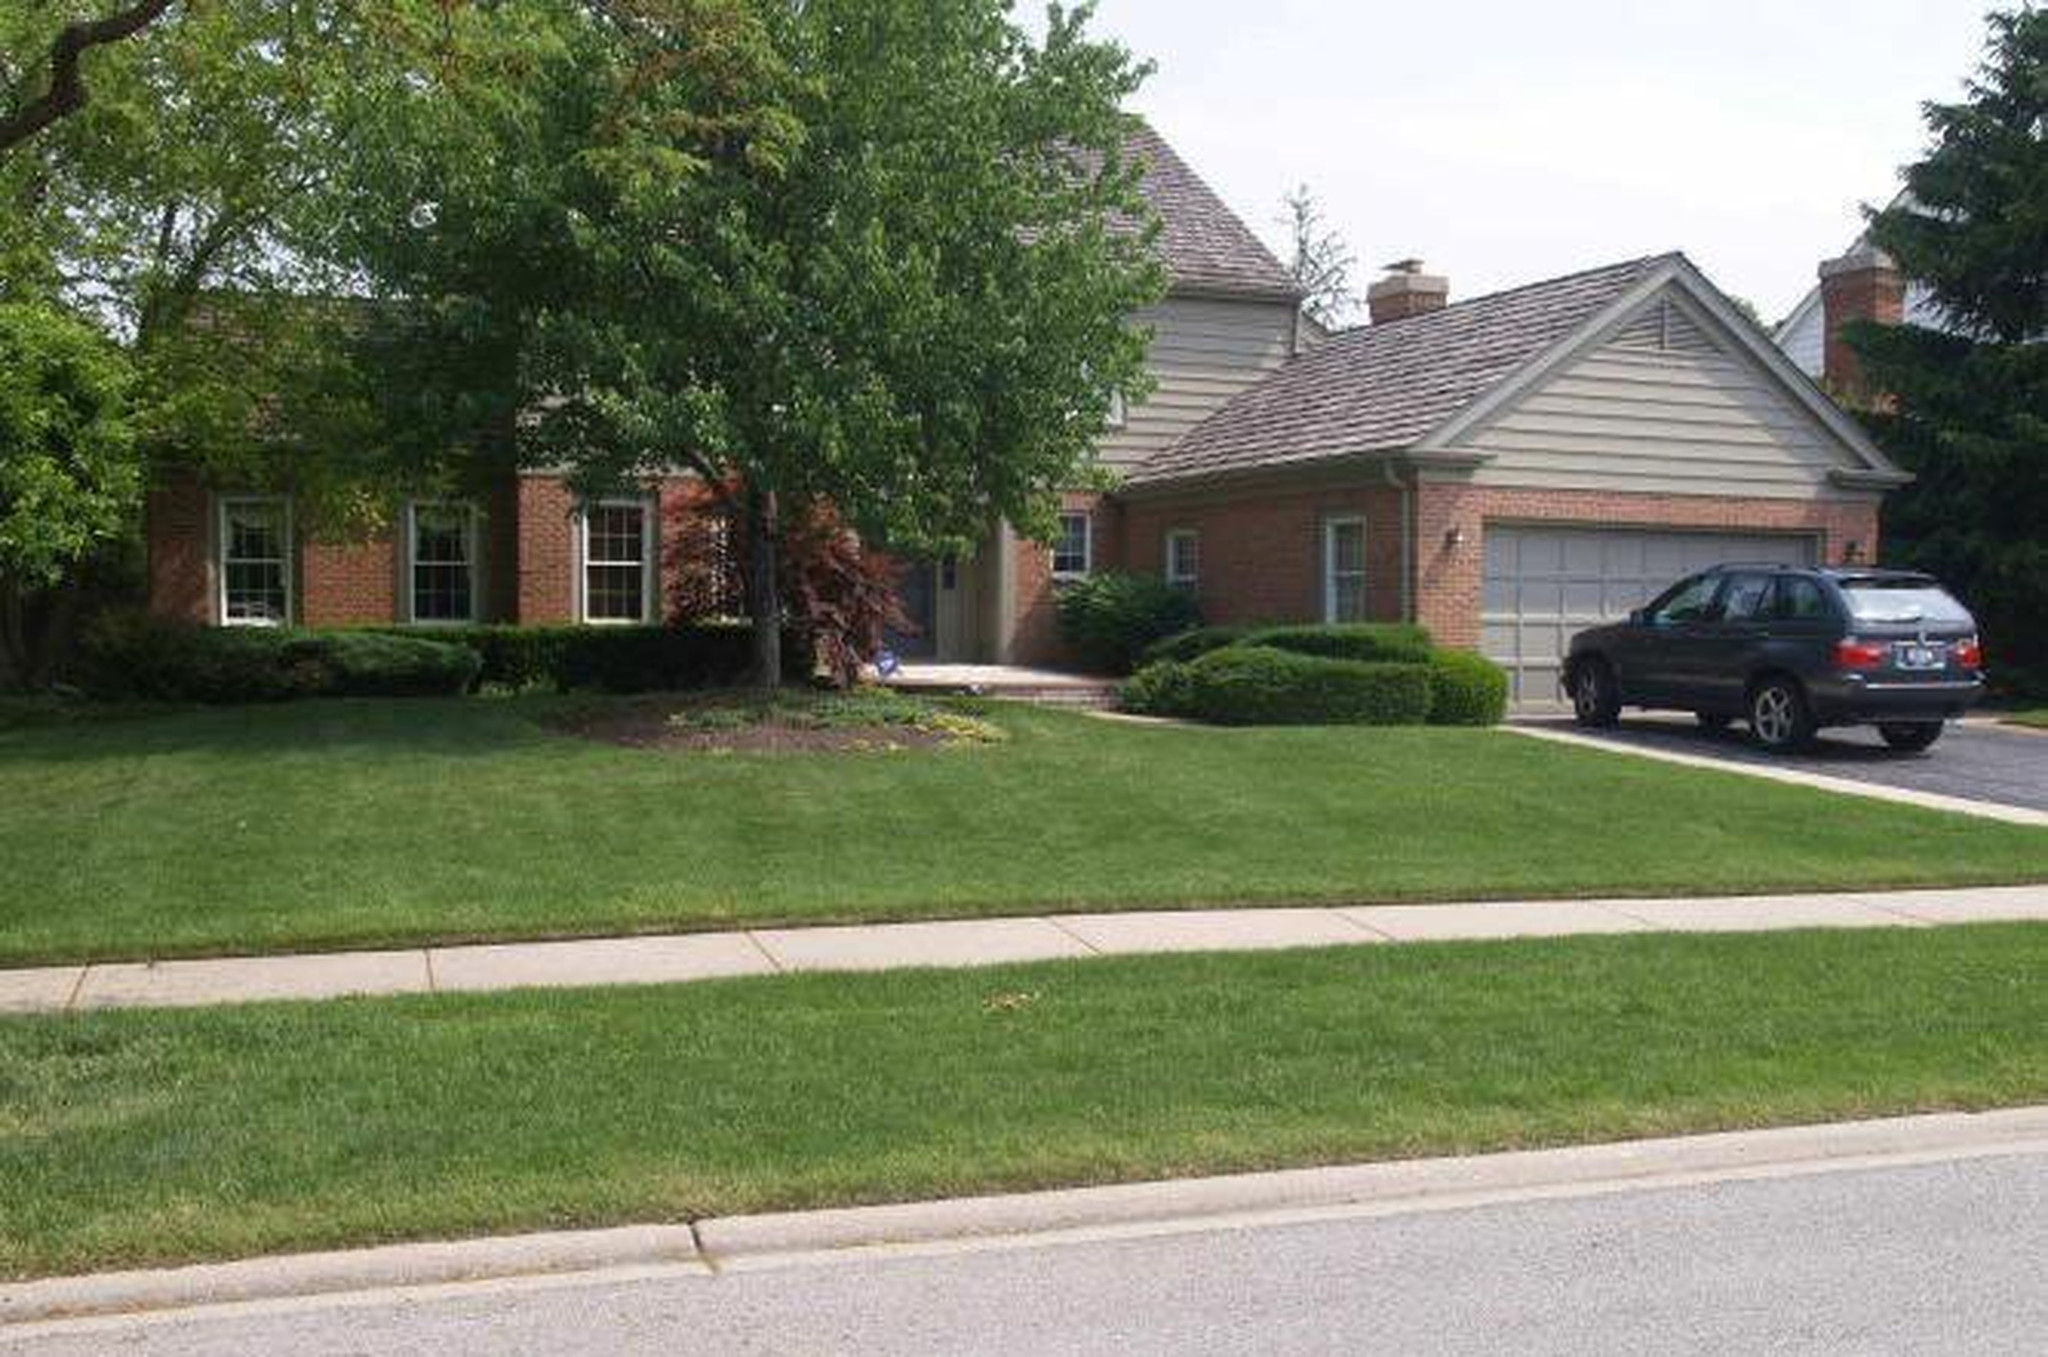 Glenview home once owned by Ryne Sandberg sells for $831,000